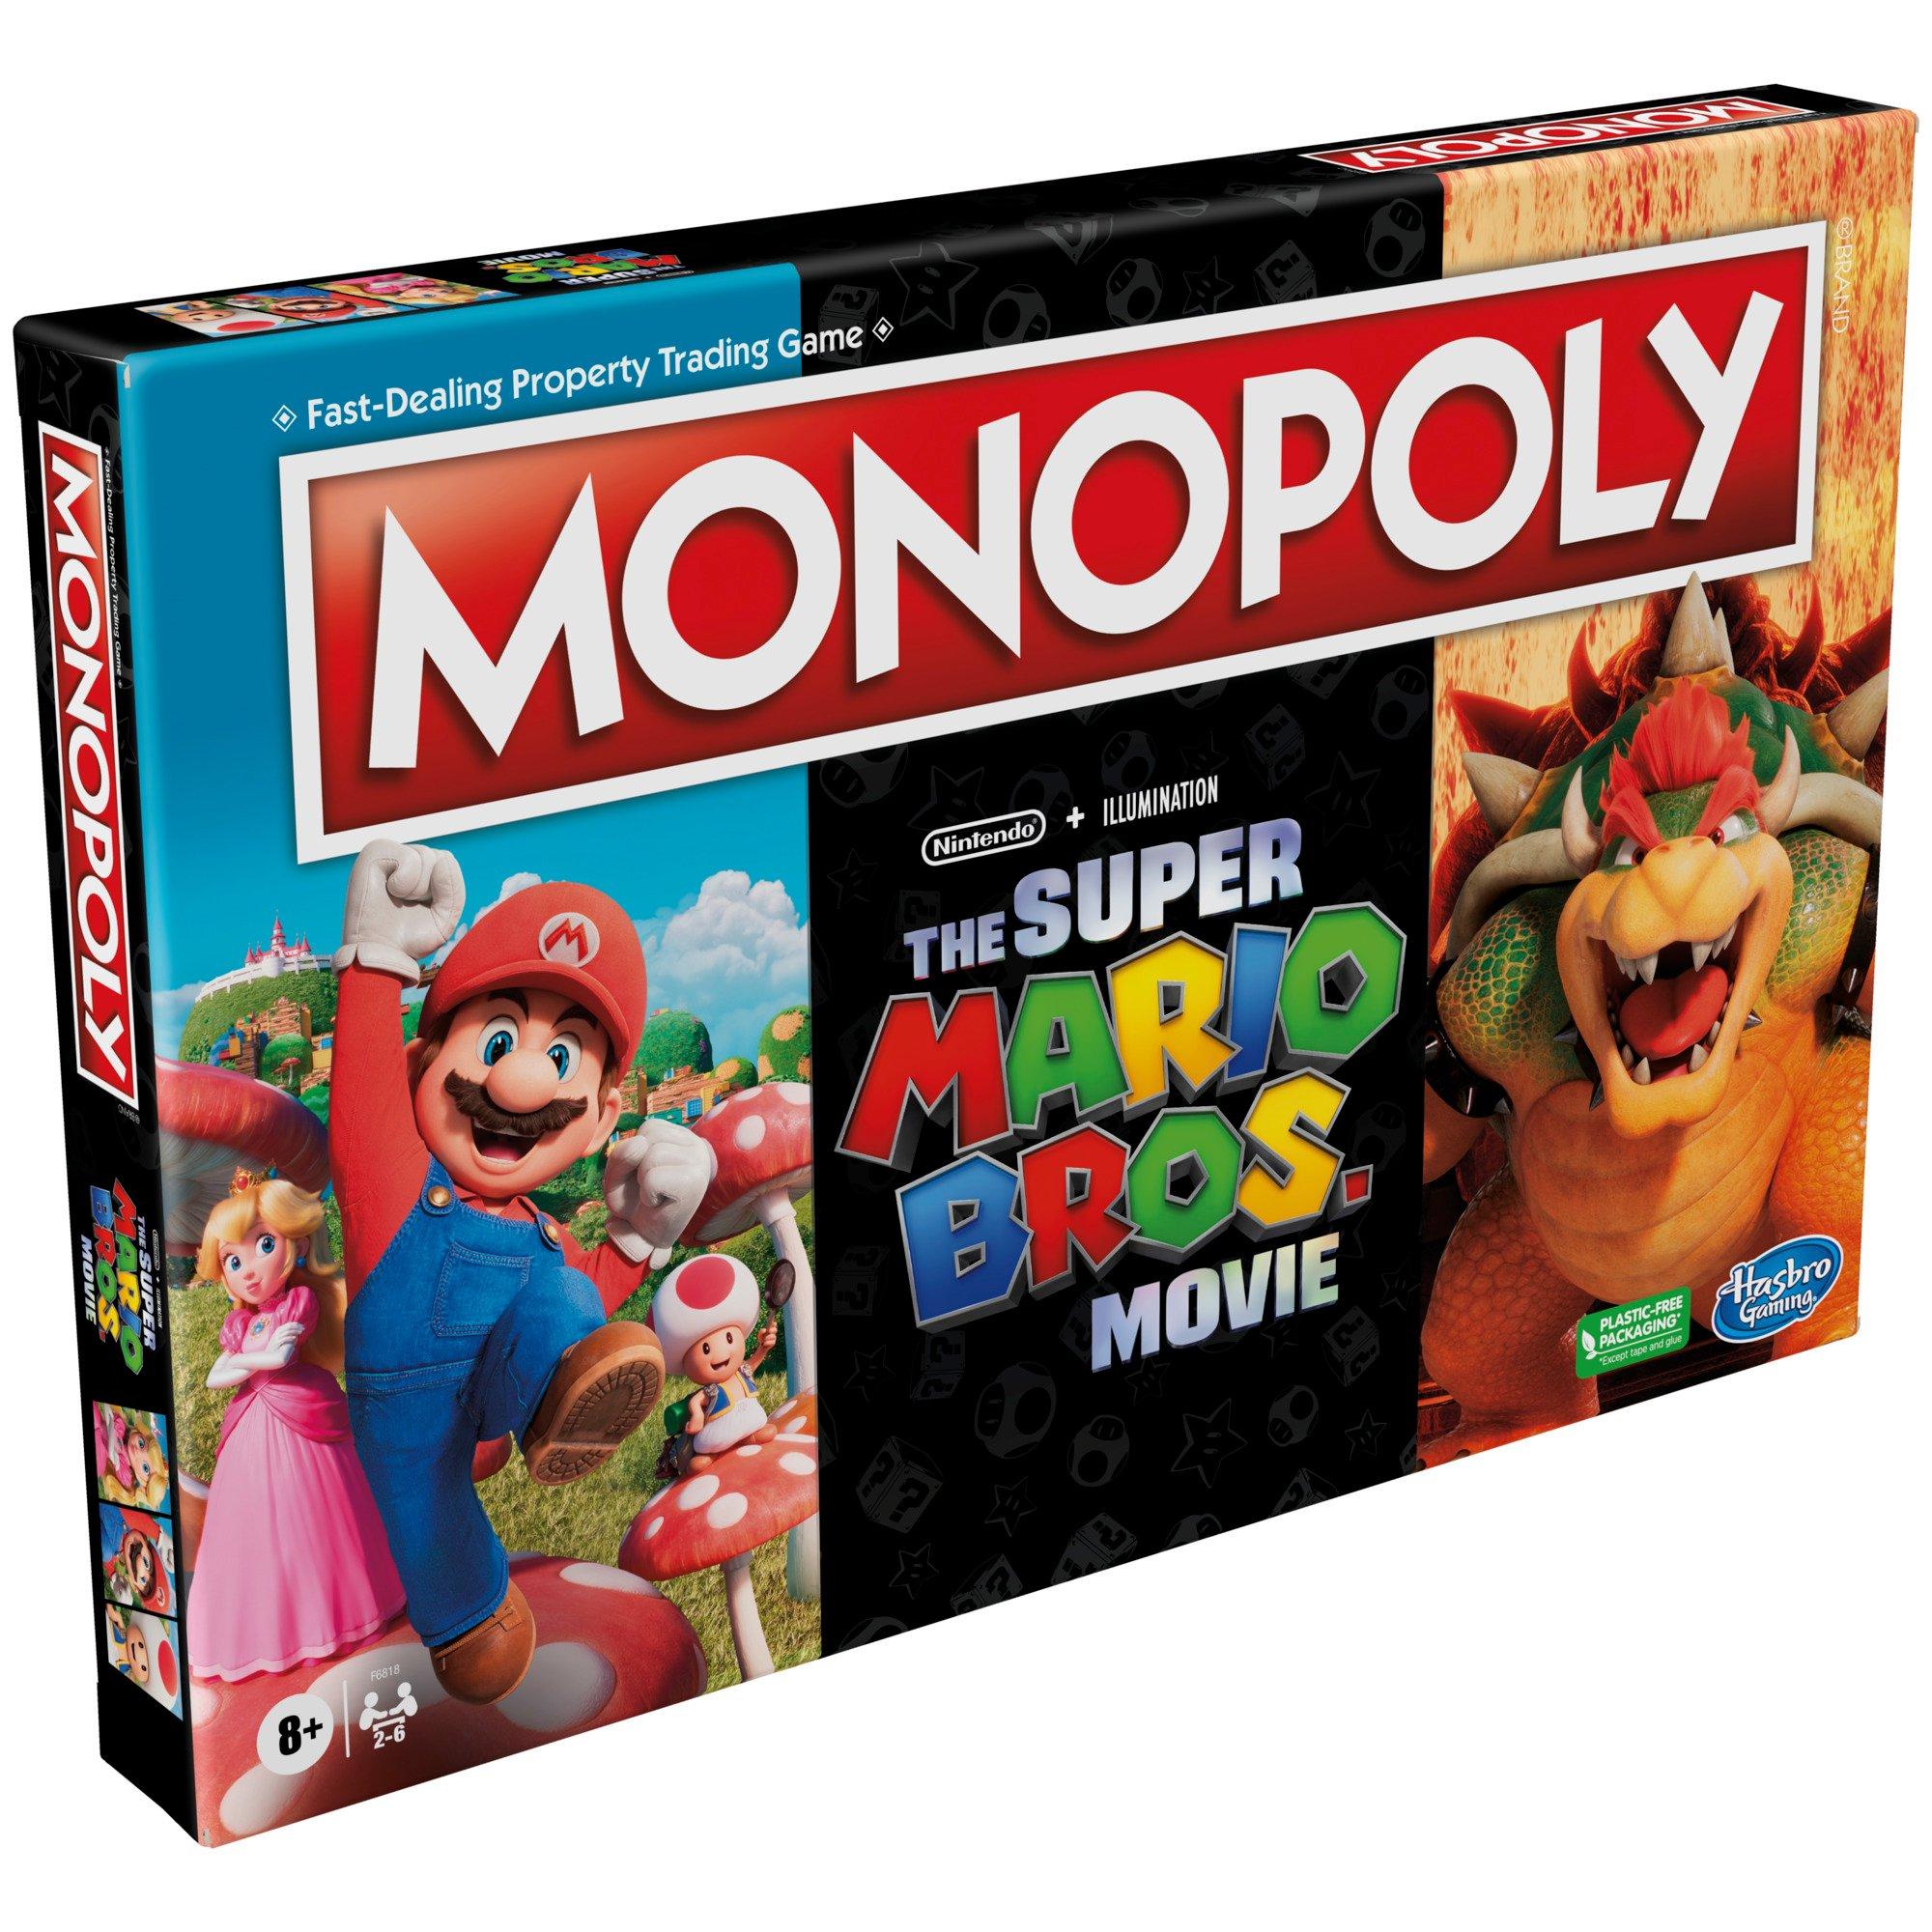 7 Best Monopoly Games for PC - Monopoly Land